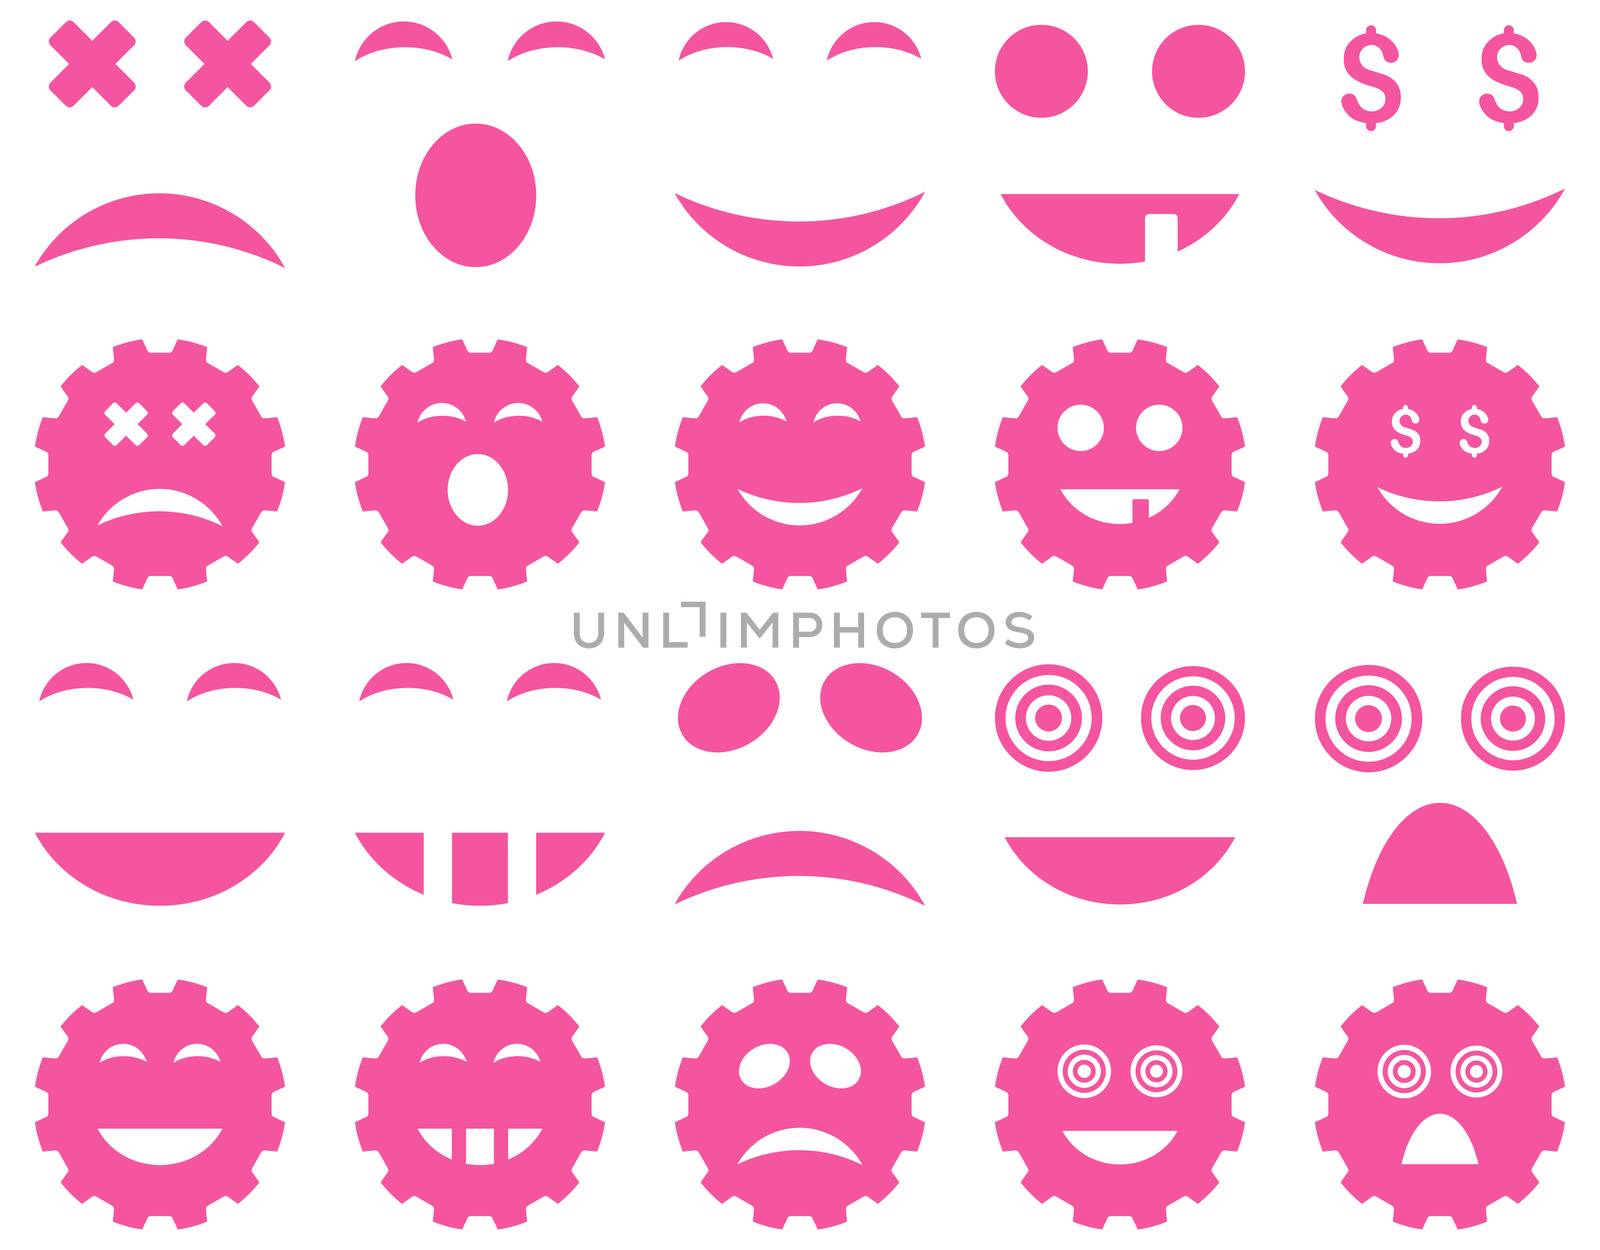 Tool, gear, smile, emotion icons. Glyph set style is flat images, pink symbols, isolated on a white background.